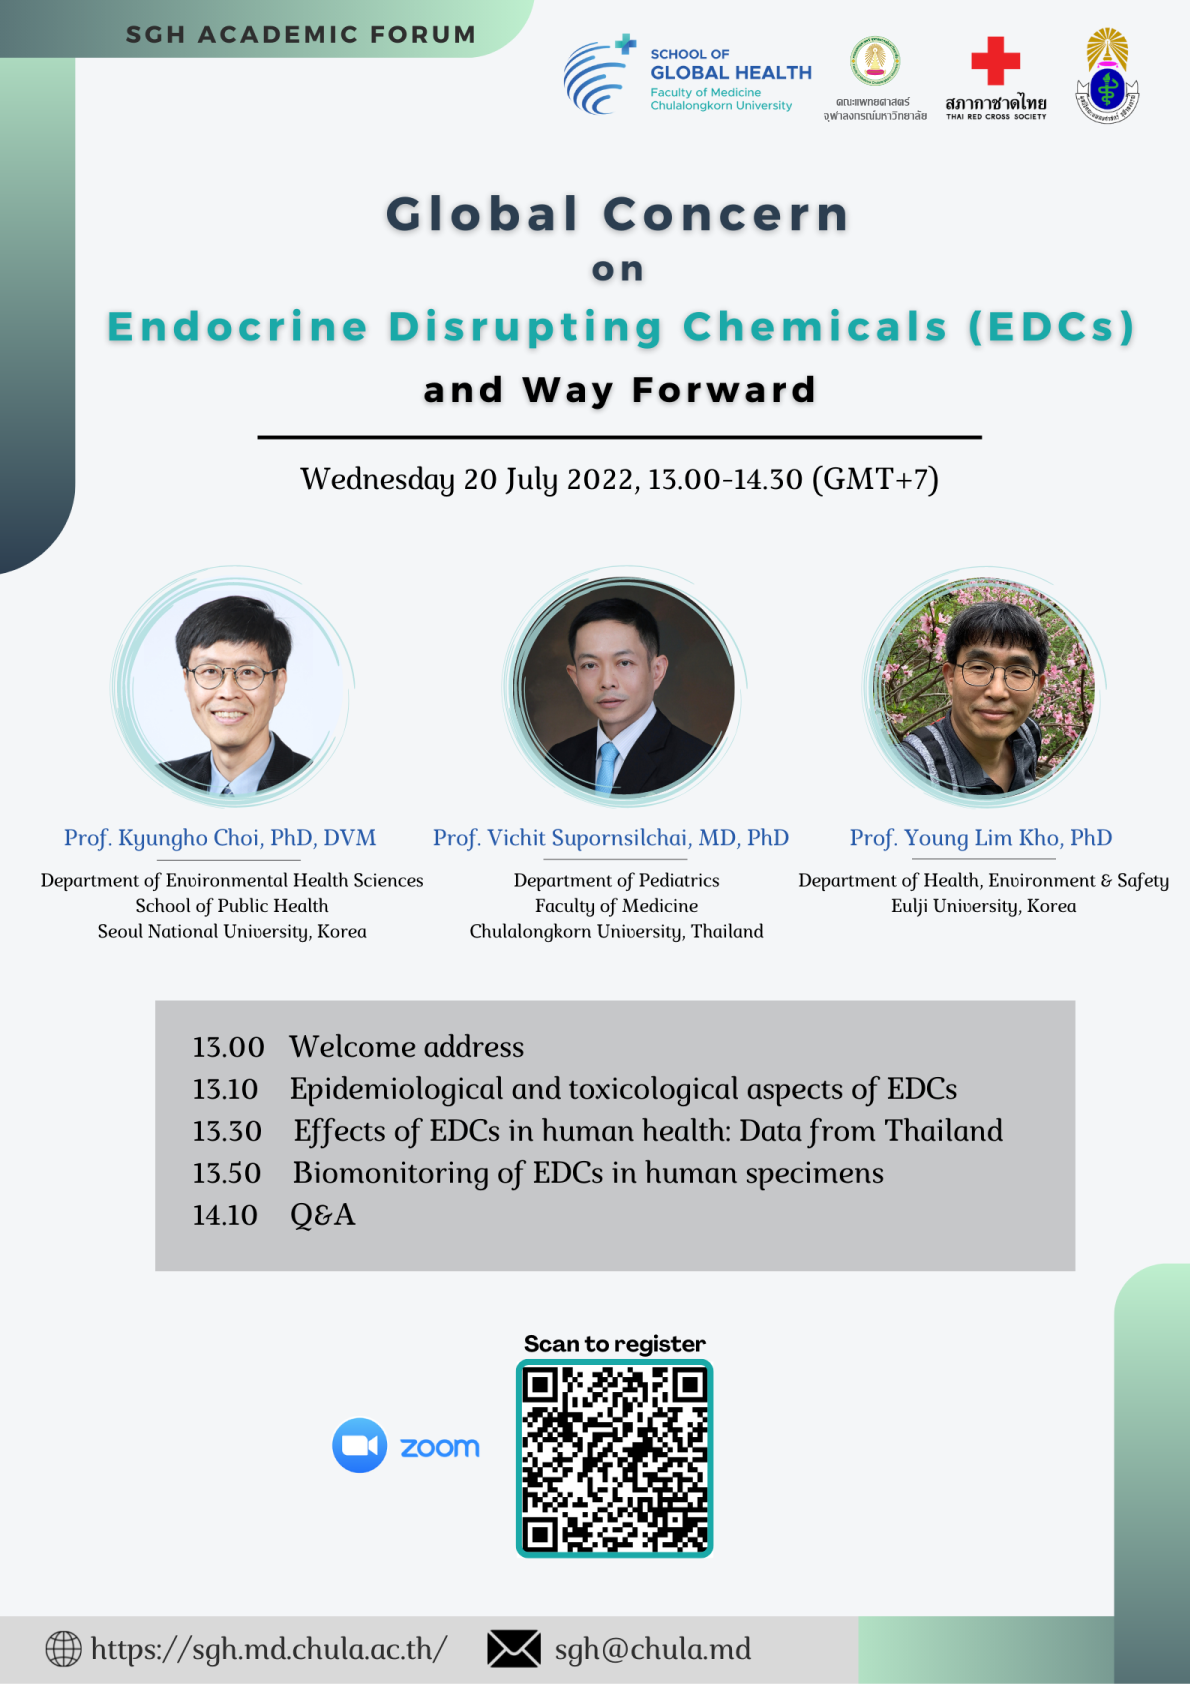 Global Concern on Endocrine Disrupting Chemicals (EDCs) and Way Forward